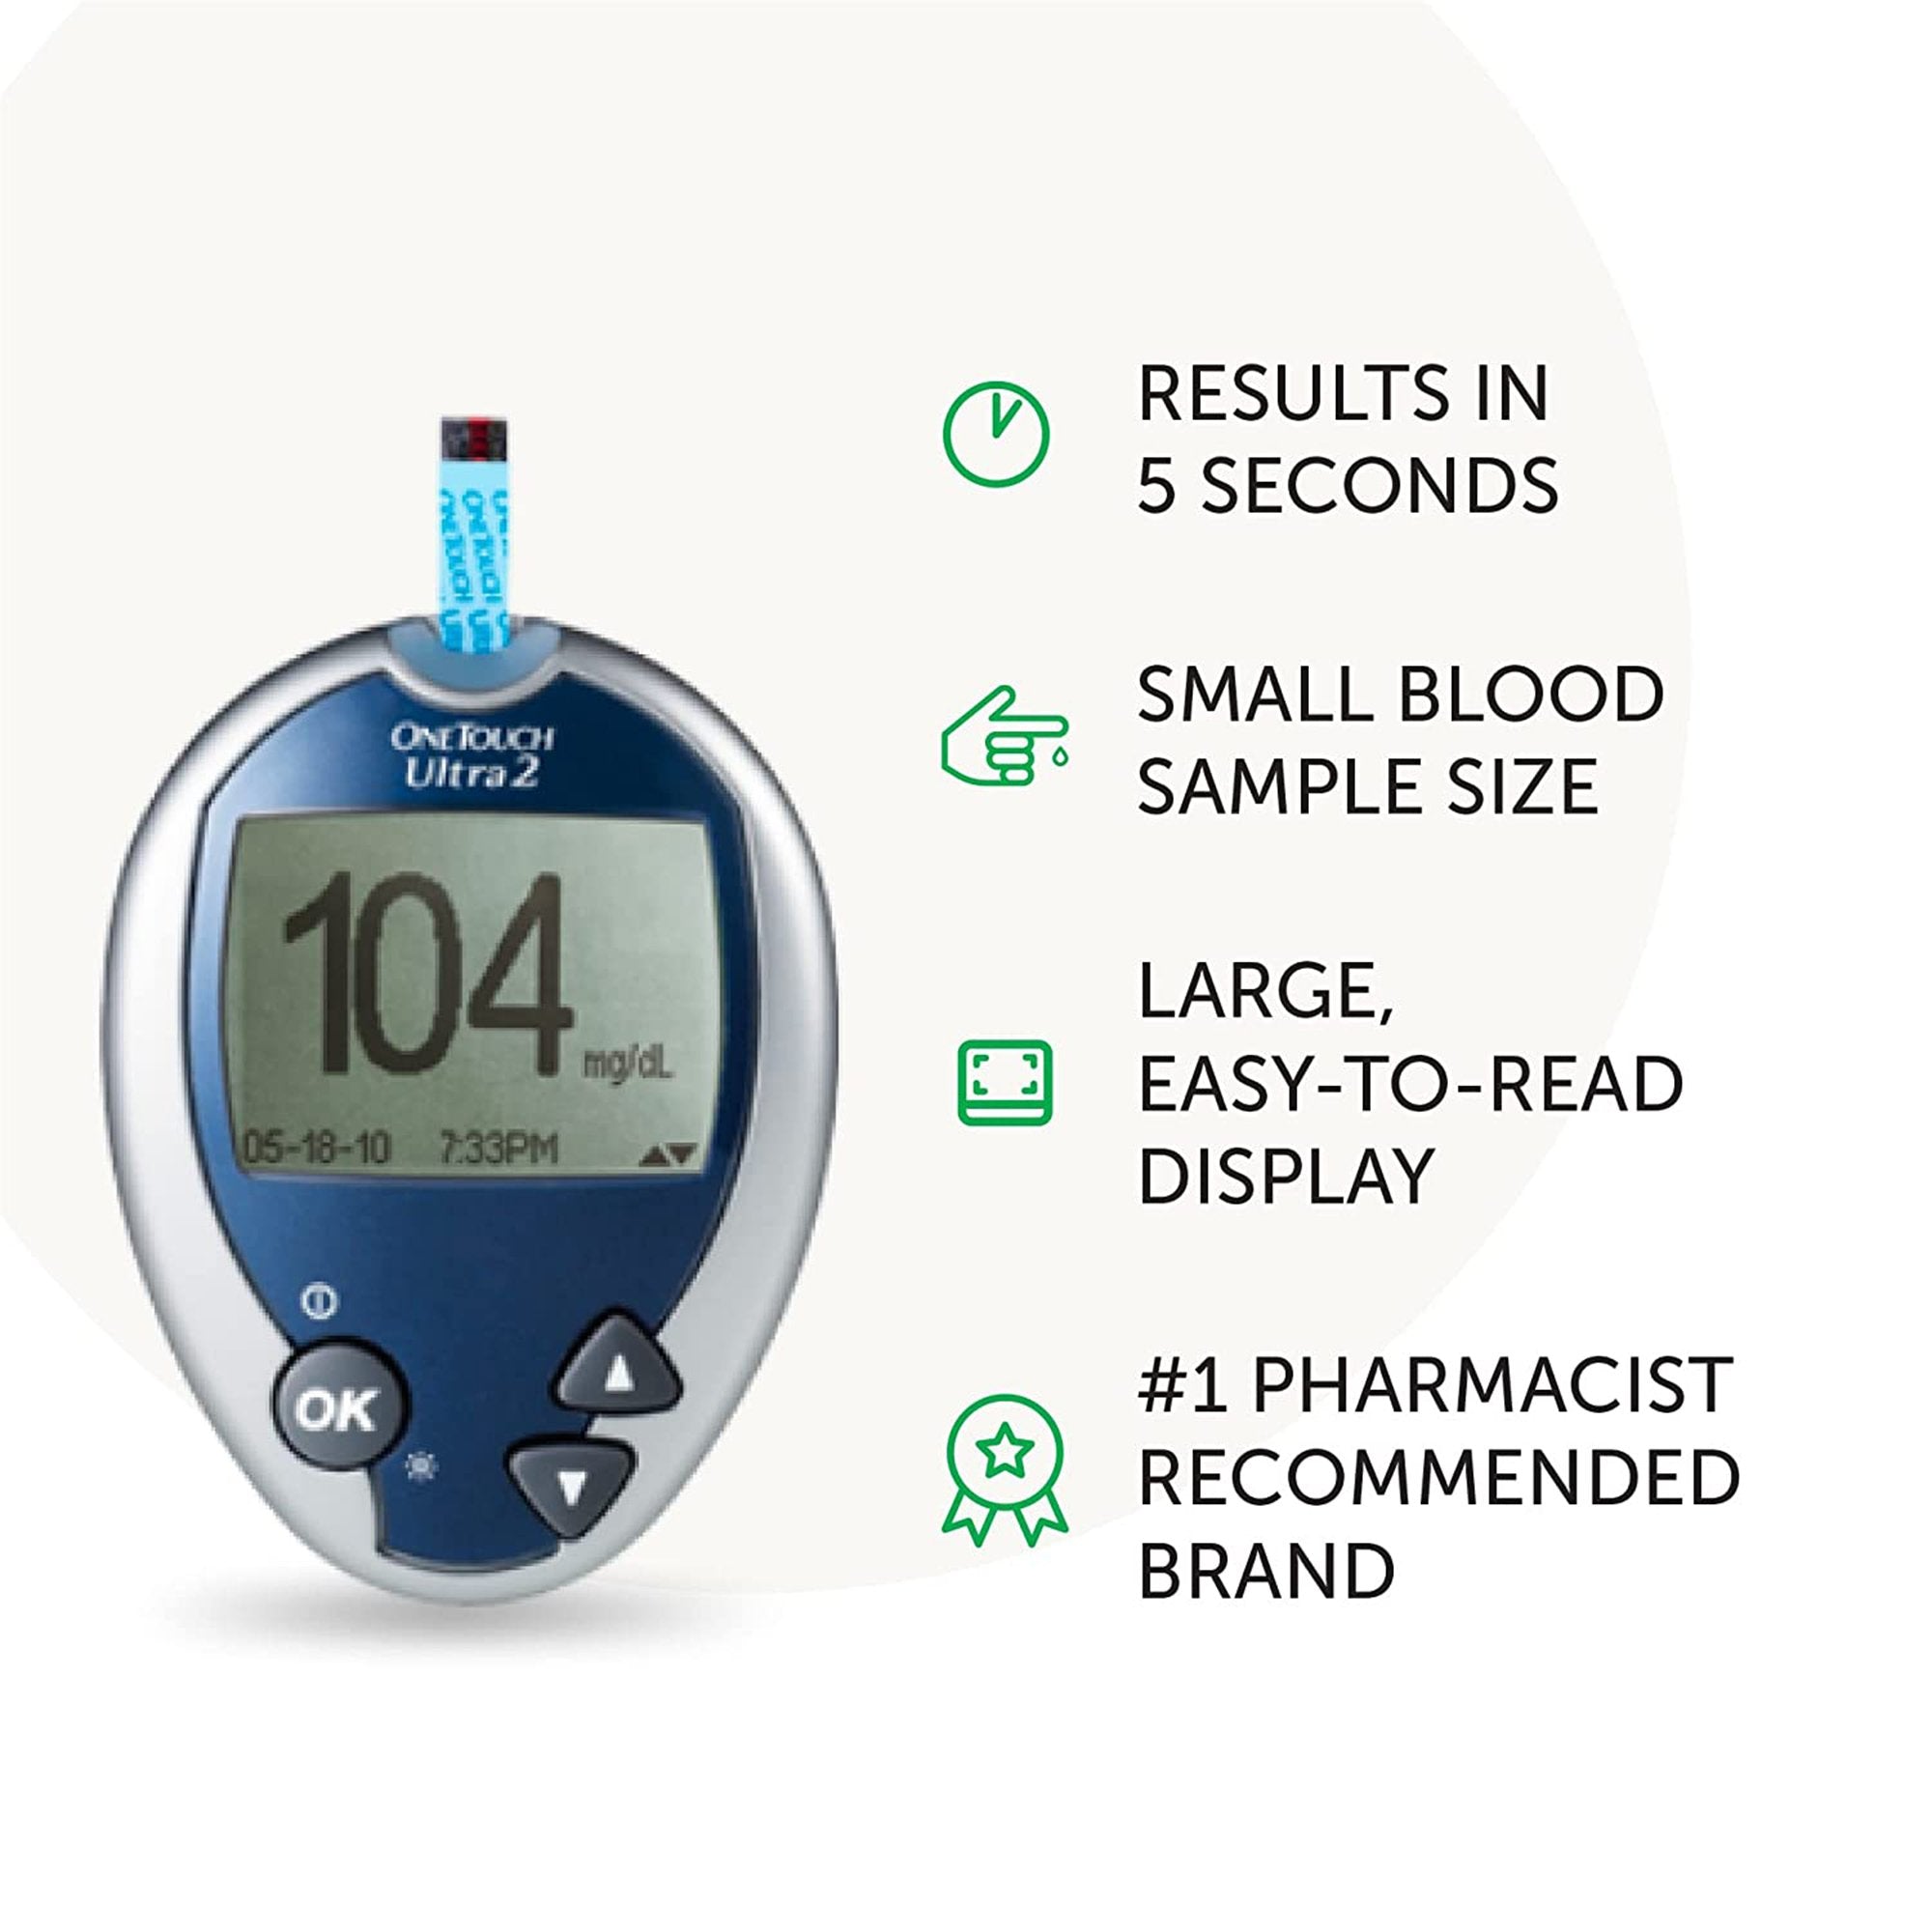 Blood Glucose Meter OneTouch Ultra 2 5 Second Results Stores up to 500 Results No Coding Required